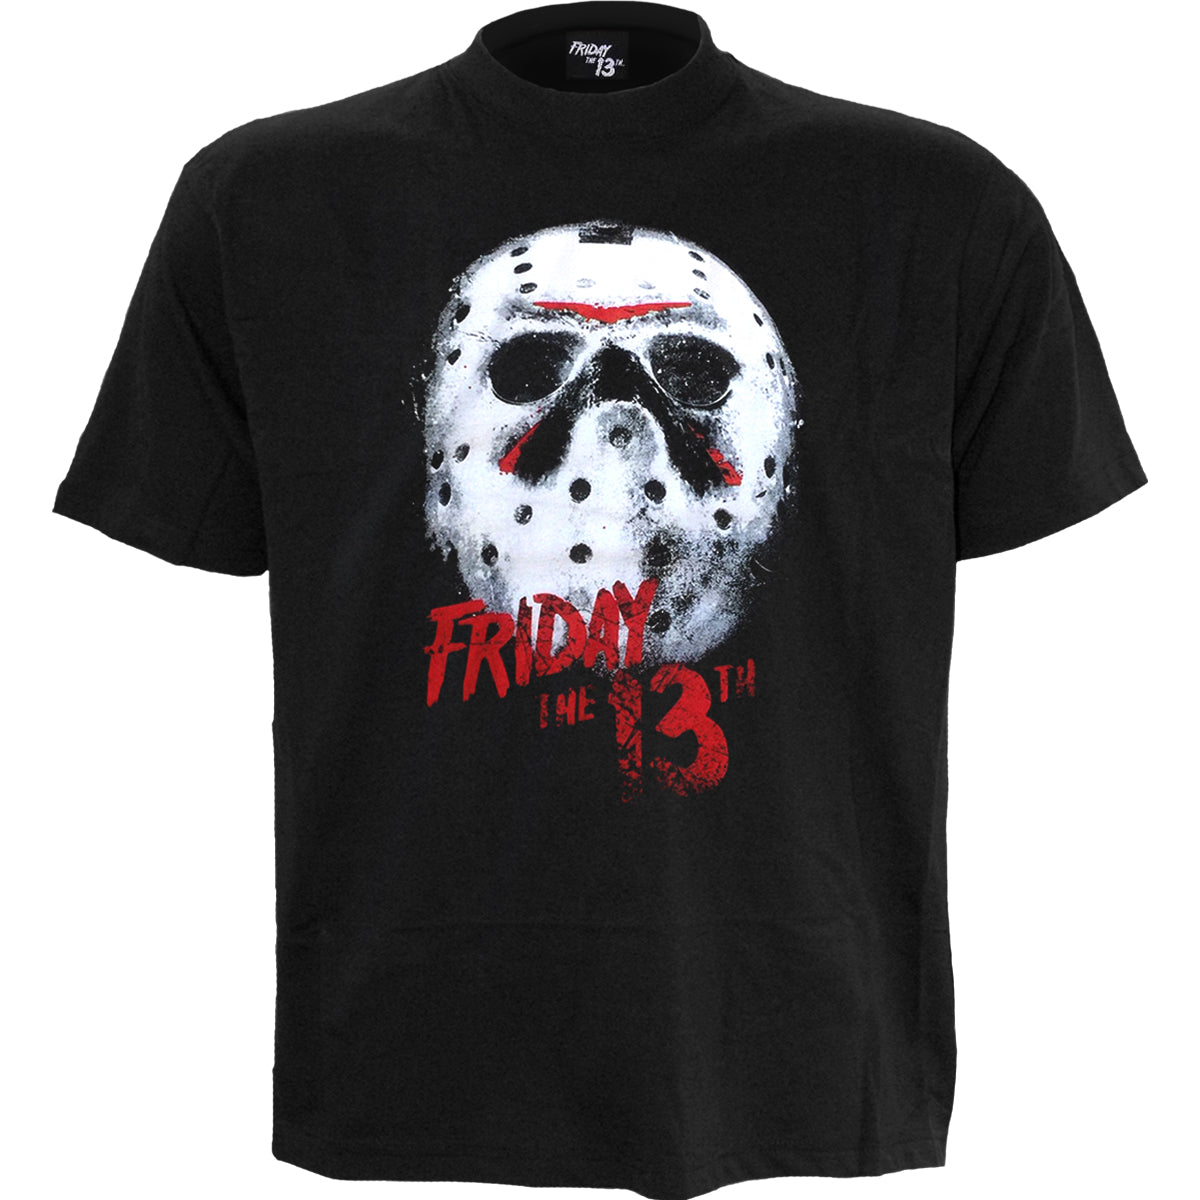 FRIDAY THE 13TH - WHITE MASK - Front Print T-Shirt Black